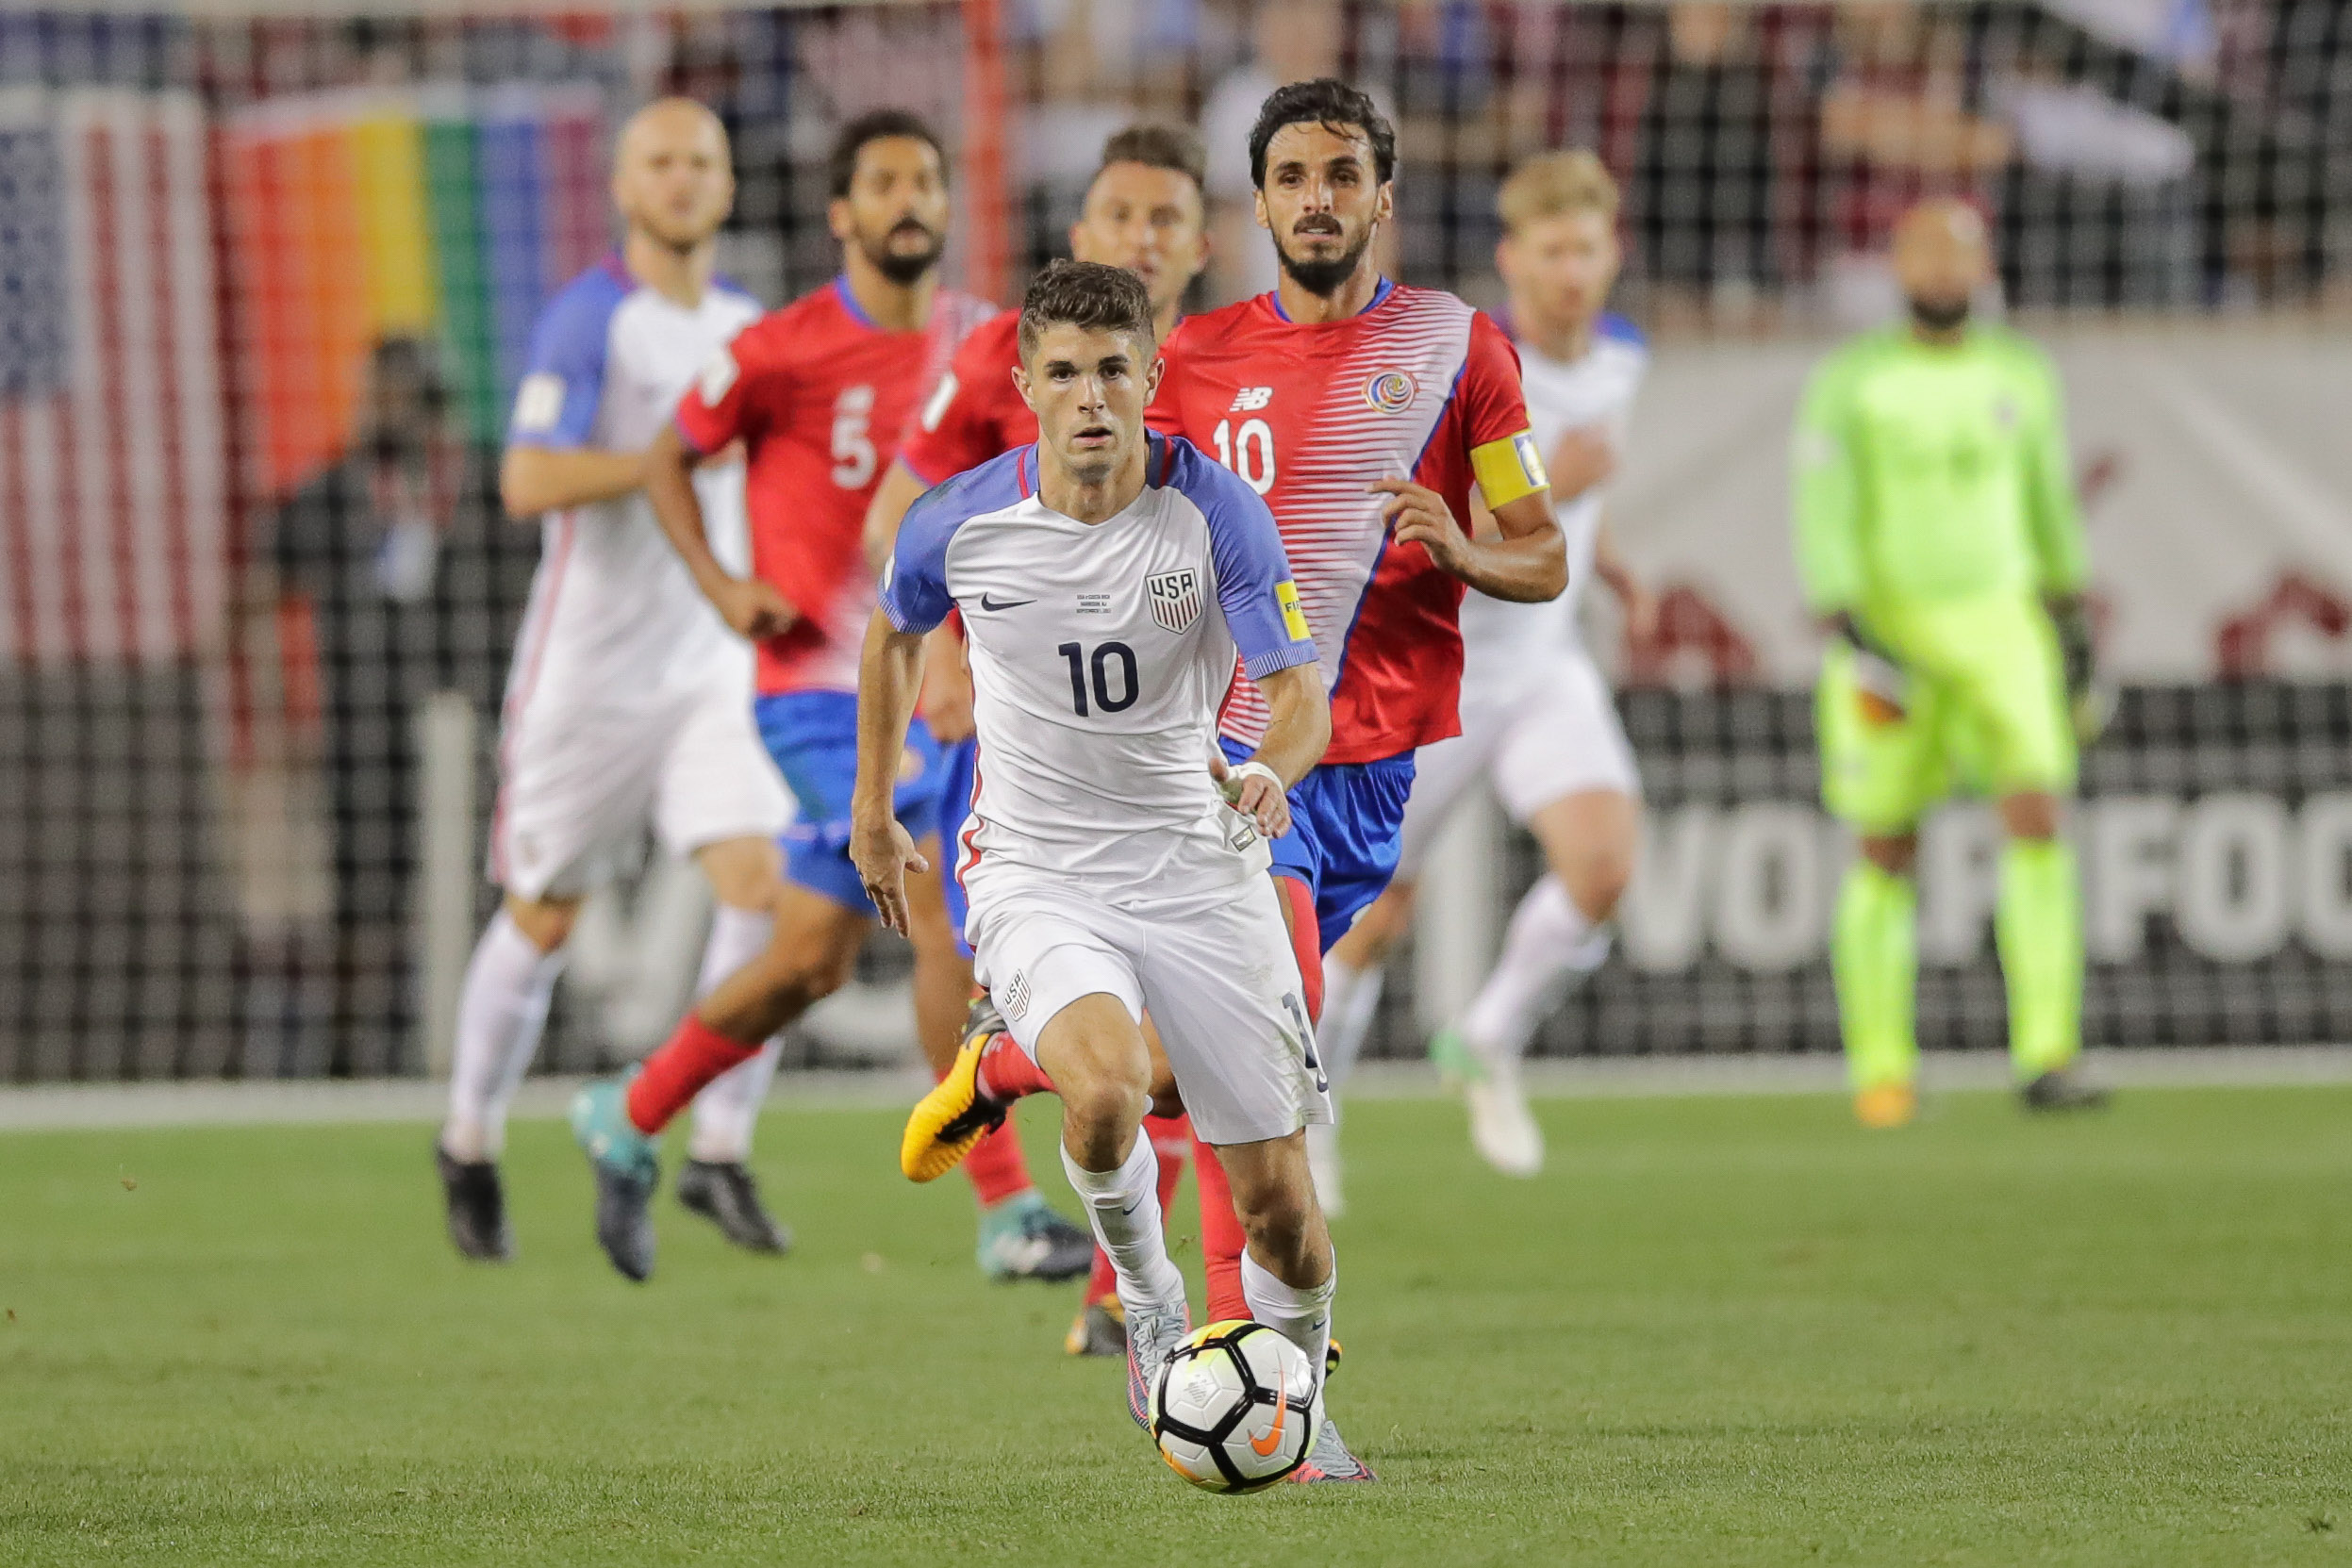 Soccer: FIFA World Cup Qualifier-Costa Rica at USA